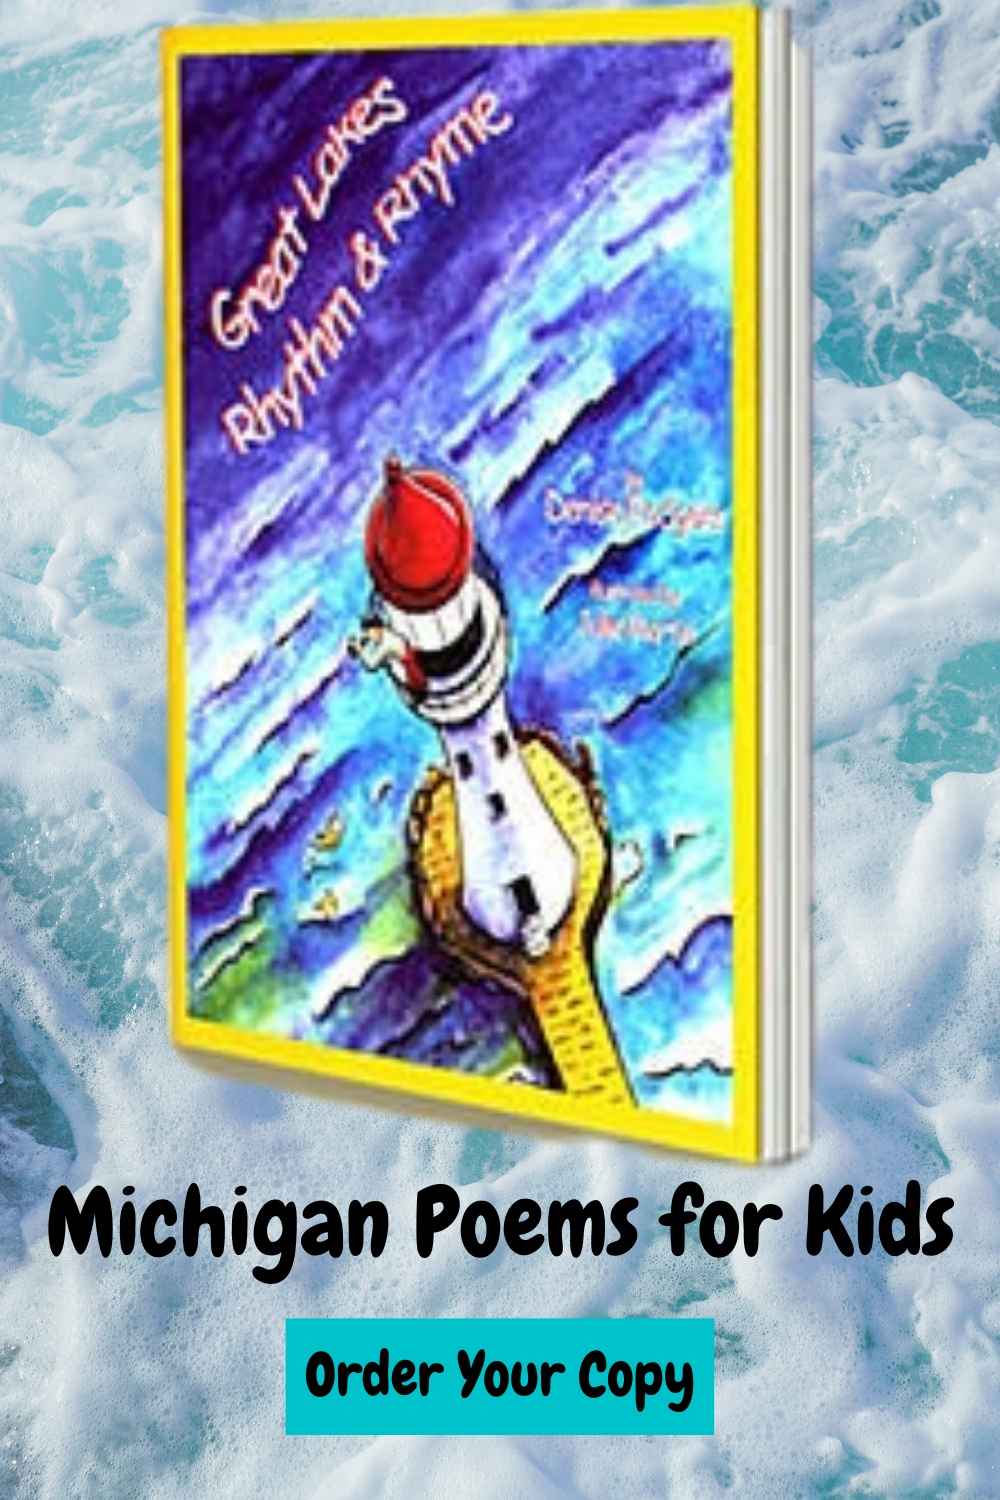 GREAT LAKES RHYTHM AND RHYME, Michigan poems for kids by Denise Rodgers on ClassroomPoems.com.